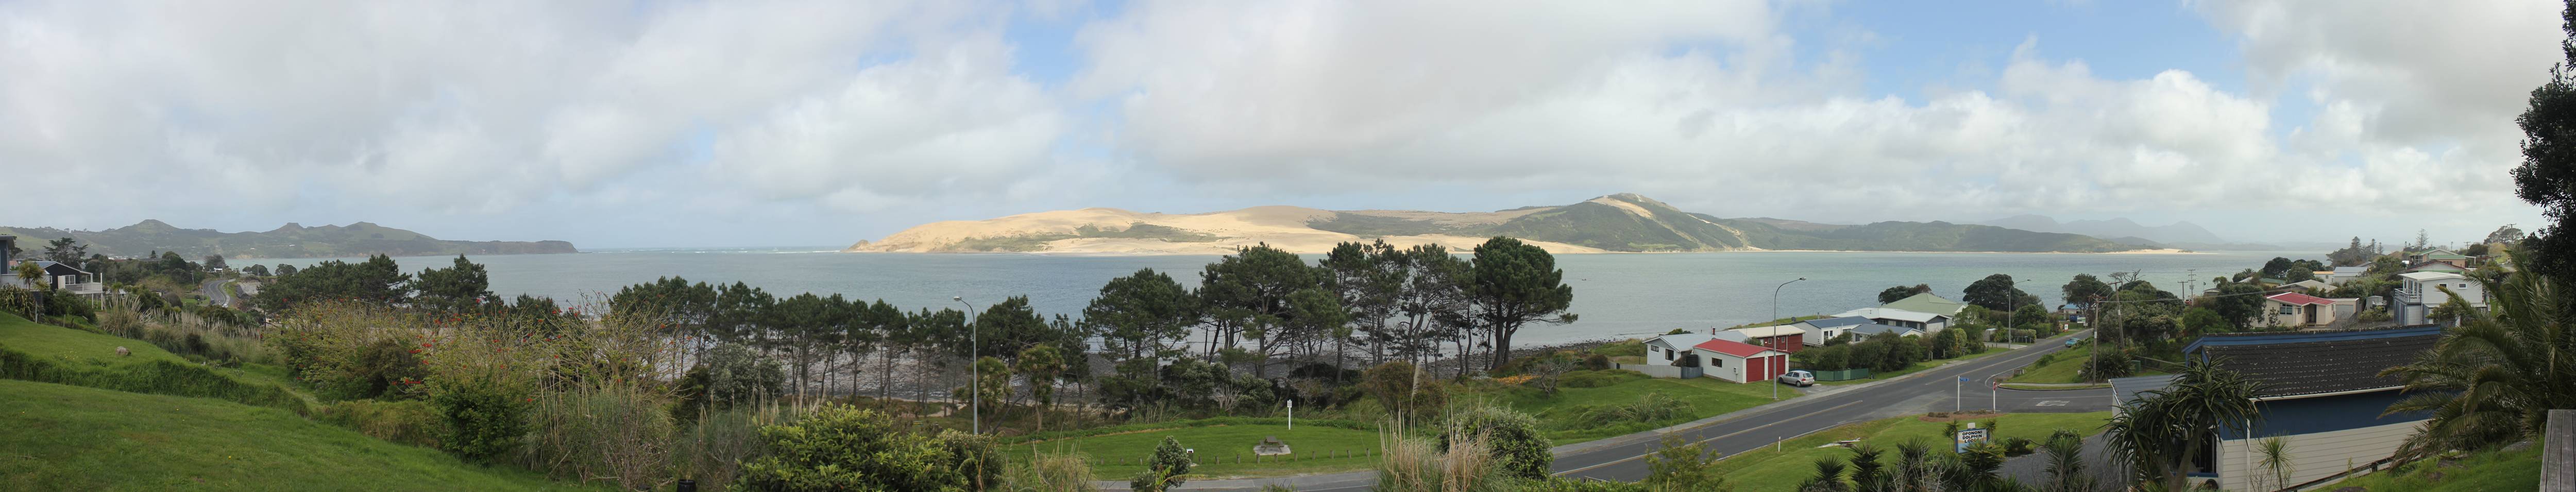 Looking over the Hokianga Horbour towards the giant dunes